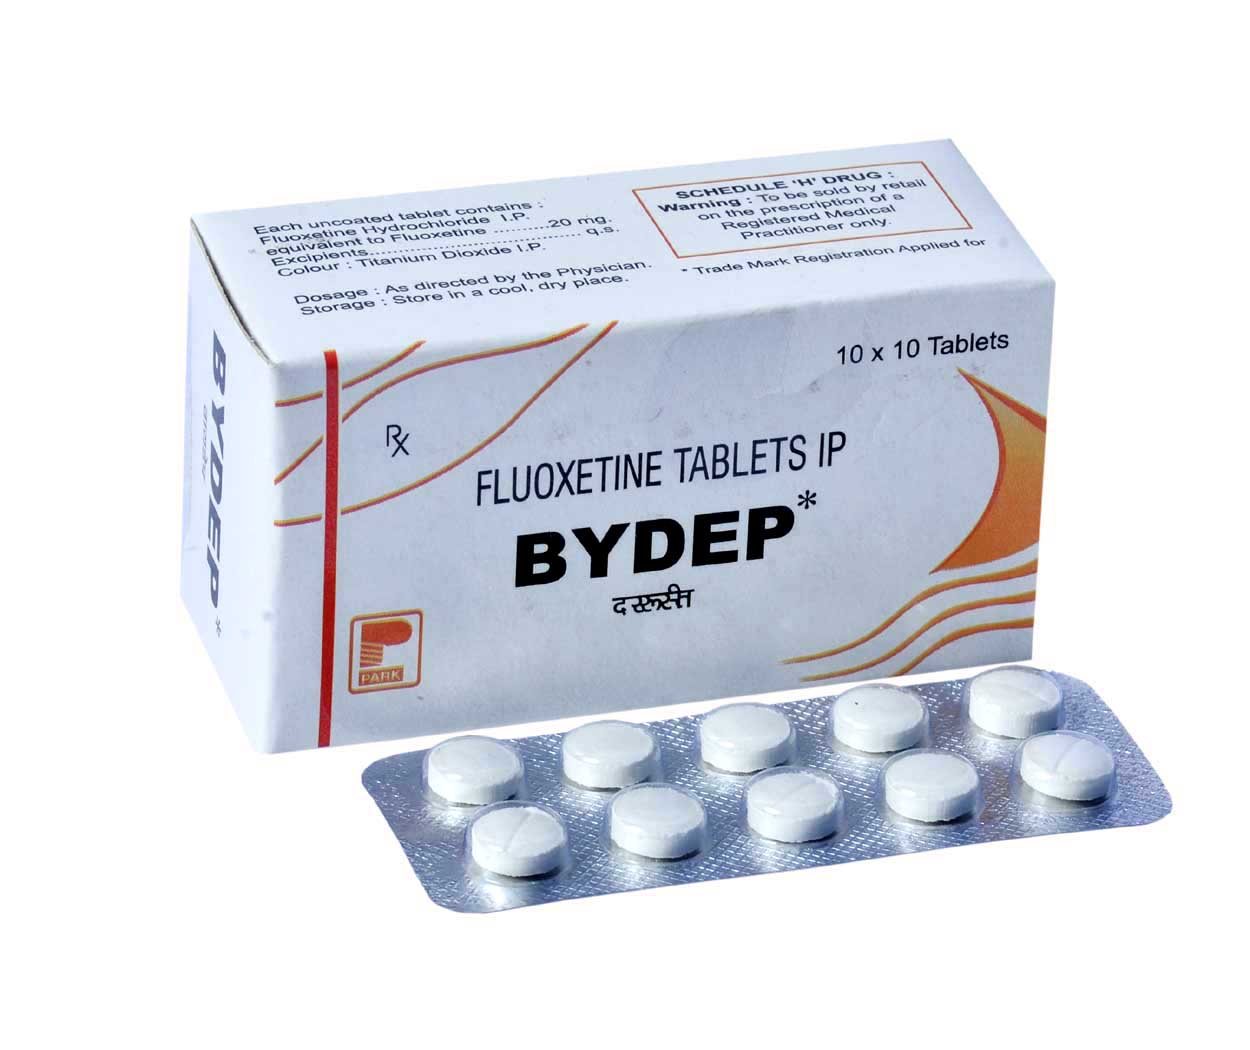 Product Name: BYDEP, Compositions of BYDEP are FLUOXETINE TABLETS IP - Park Pharmaceuticals